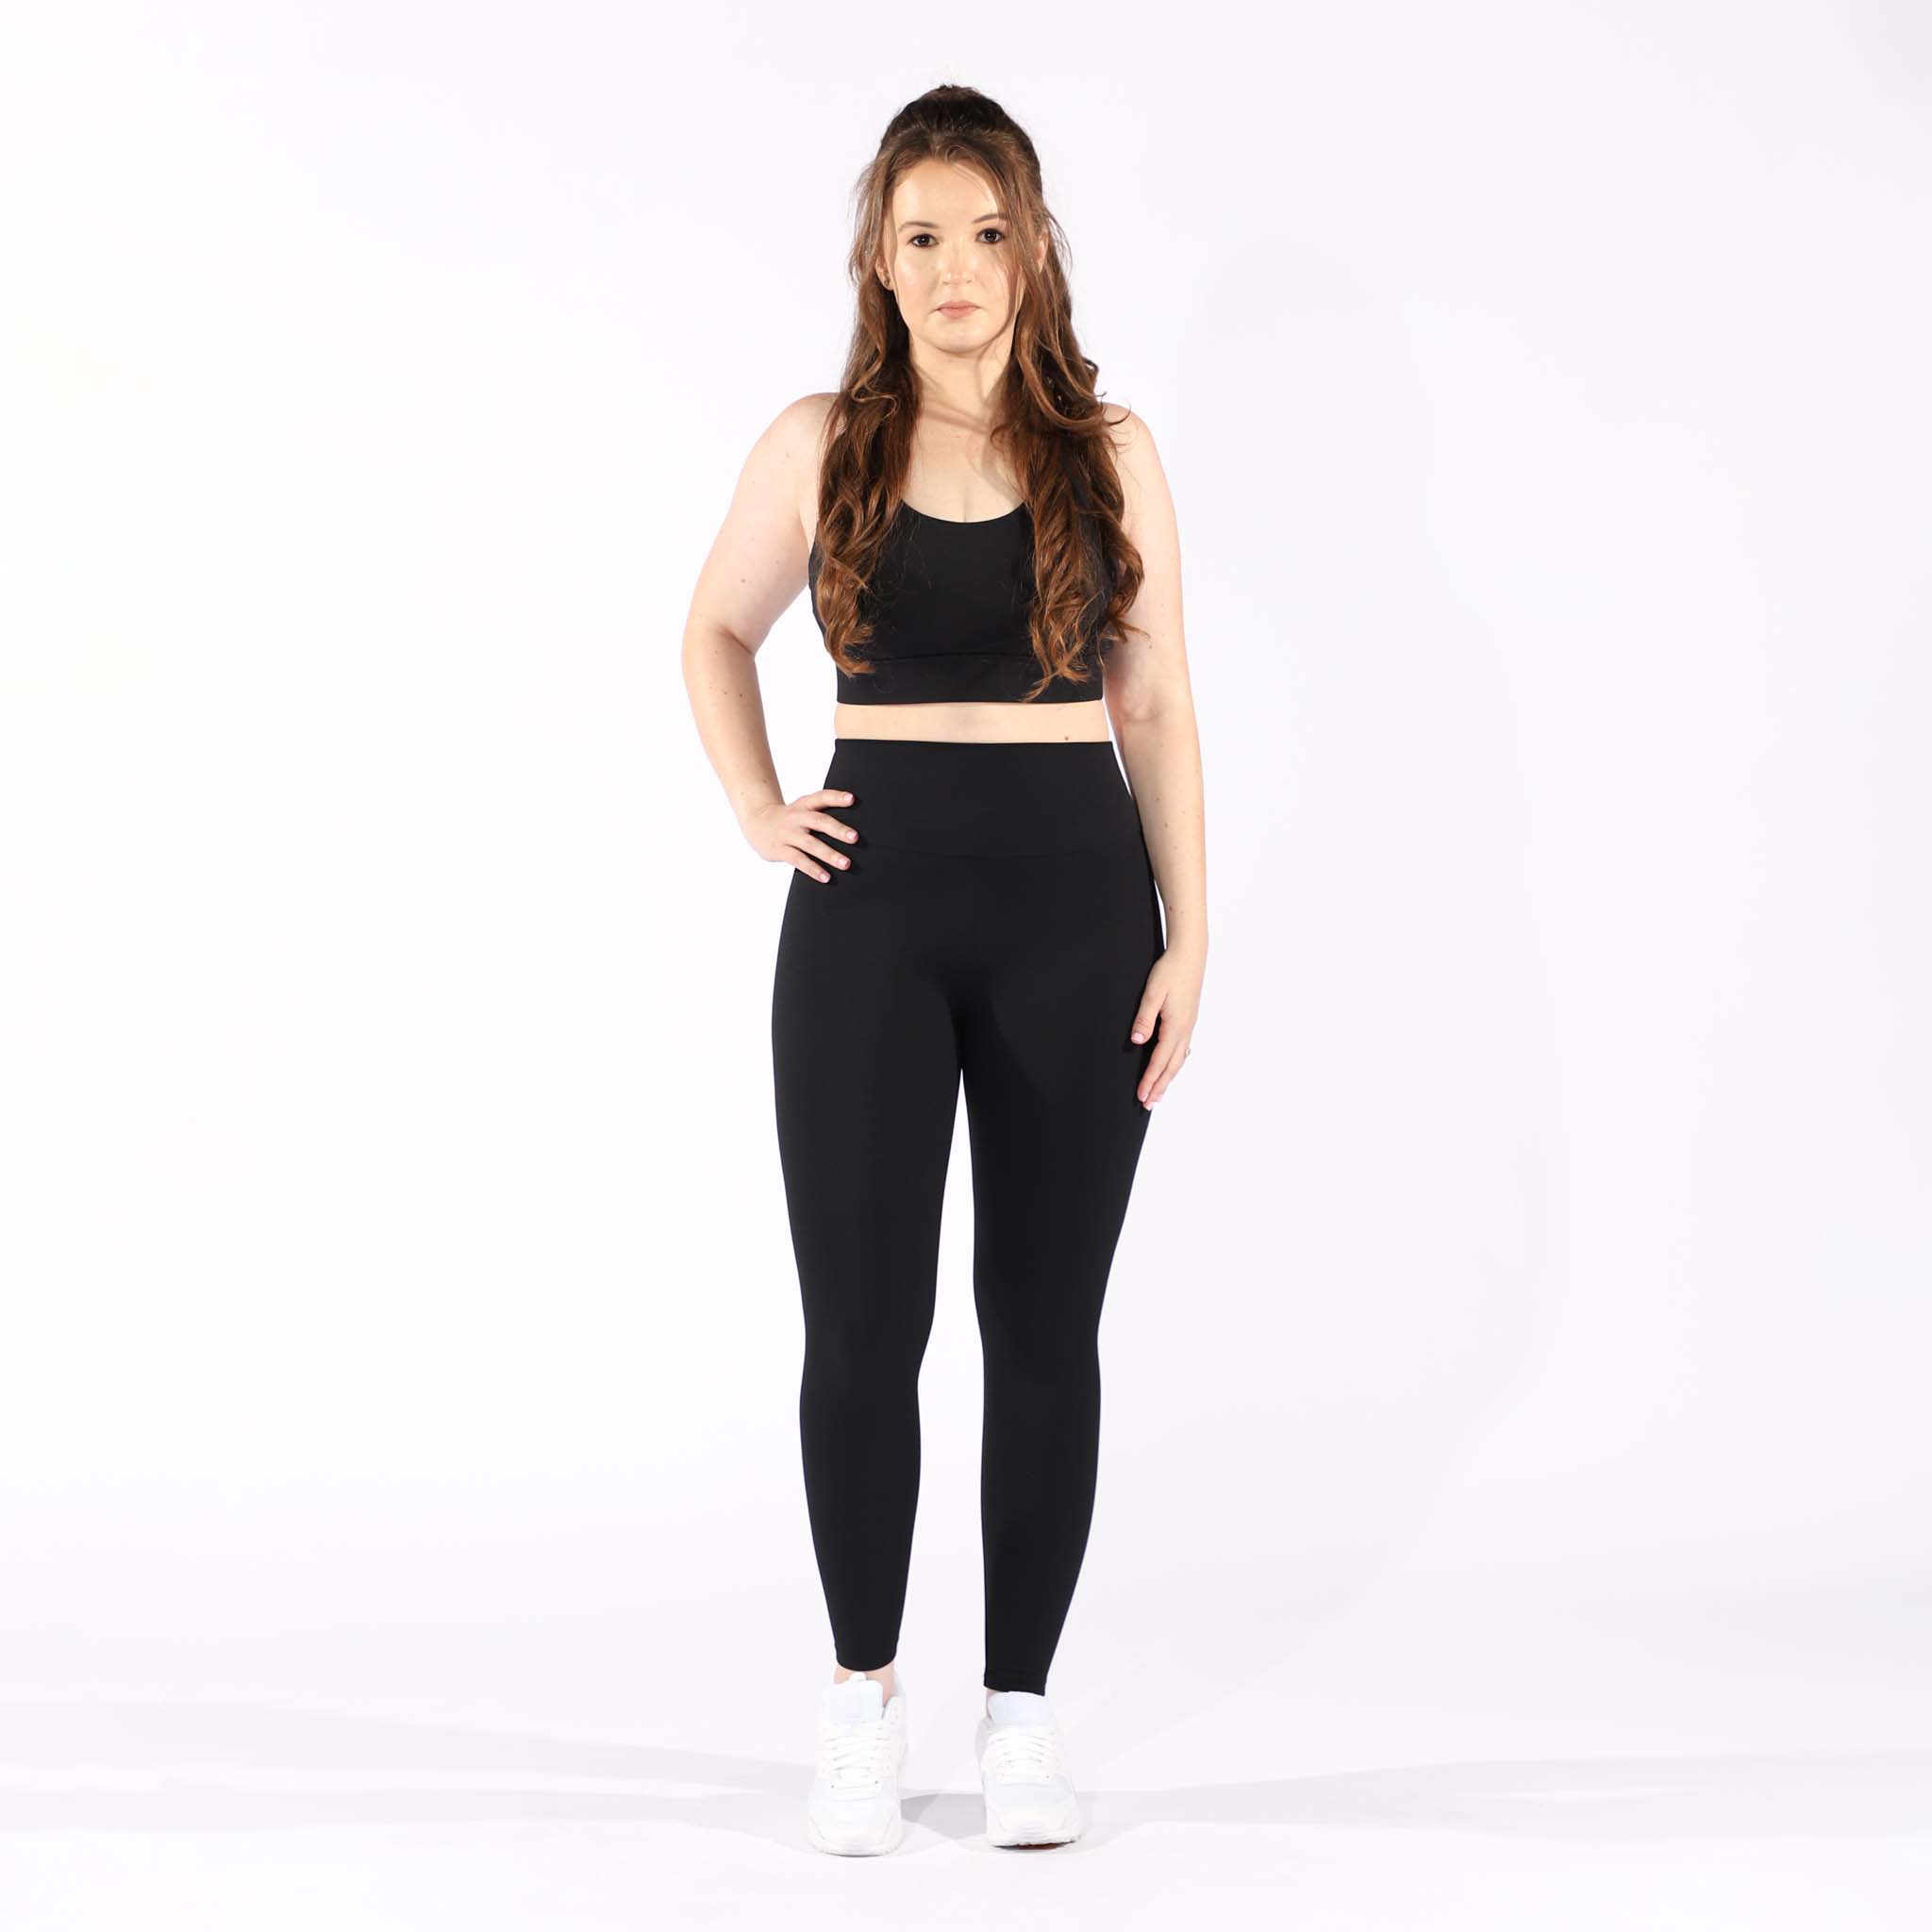 How The Right Legging Can Help You Get The Snatched Waist, by Adrisolusa